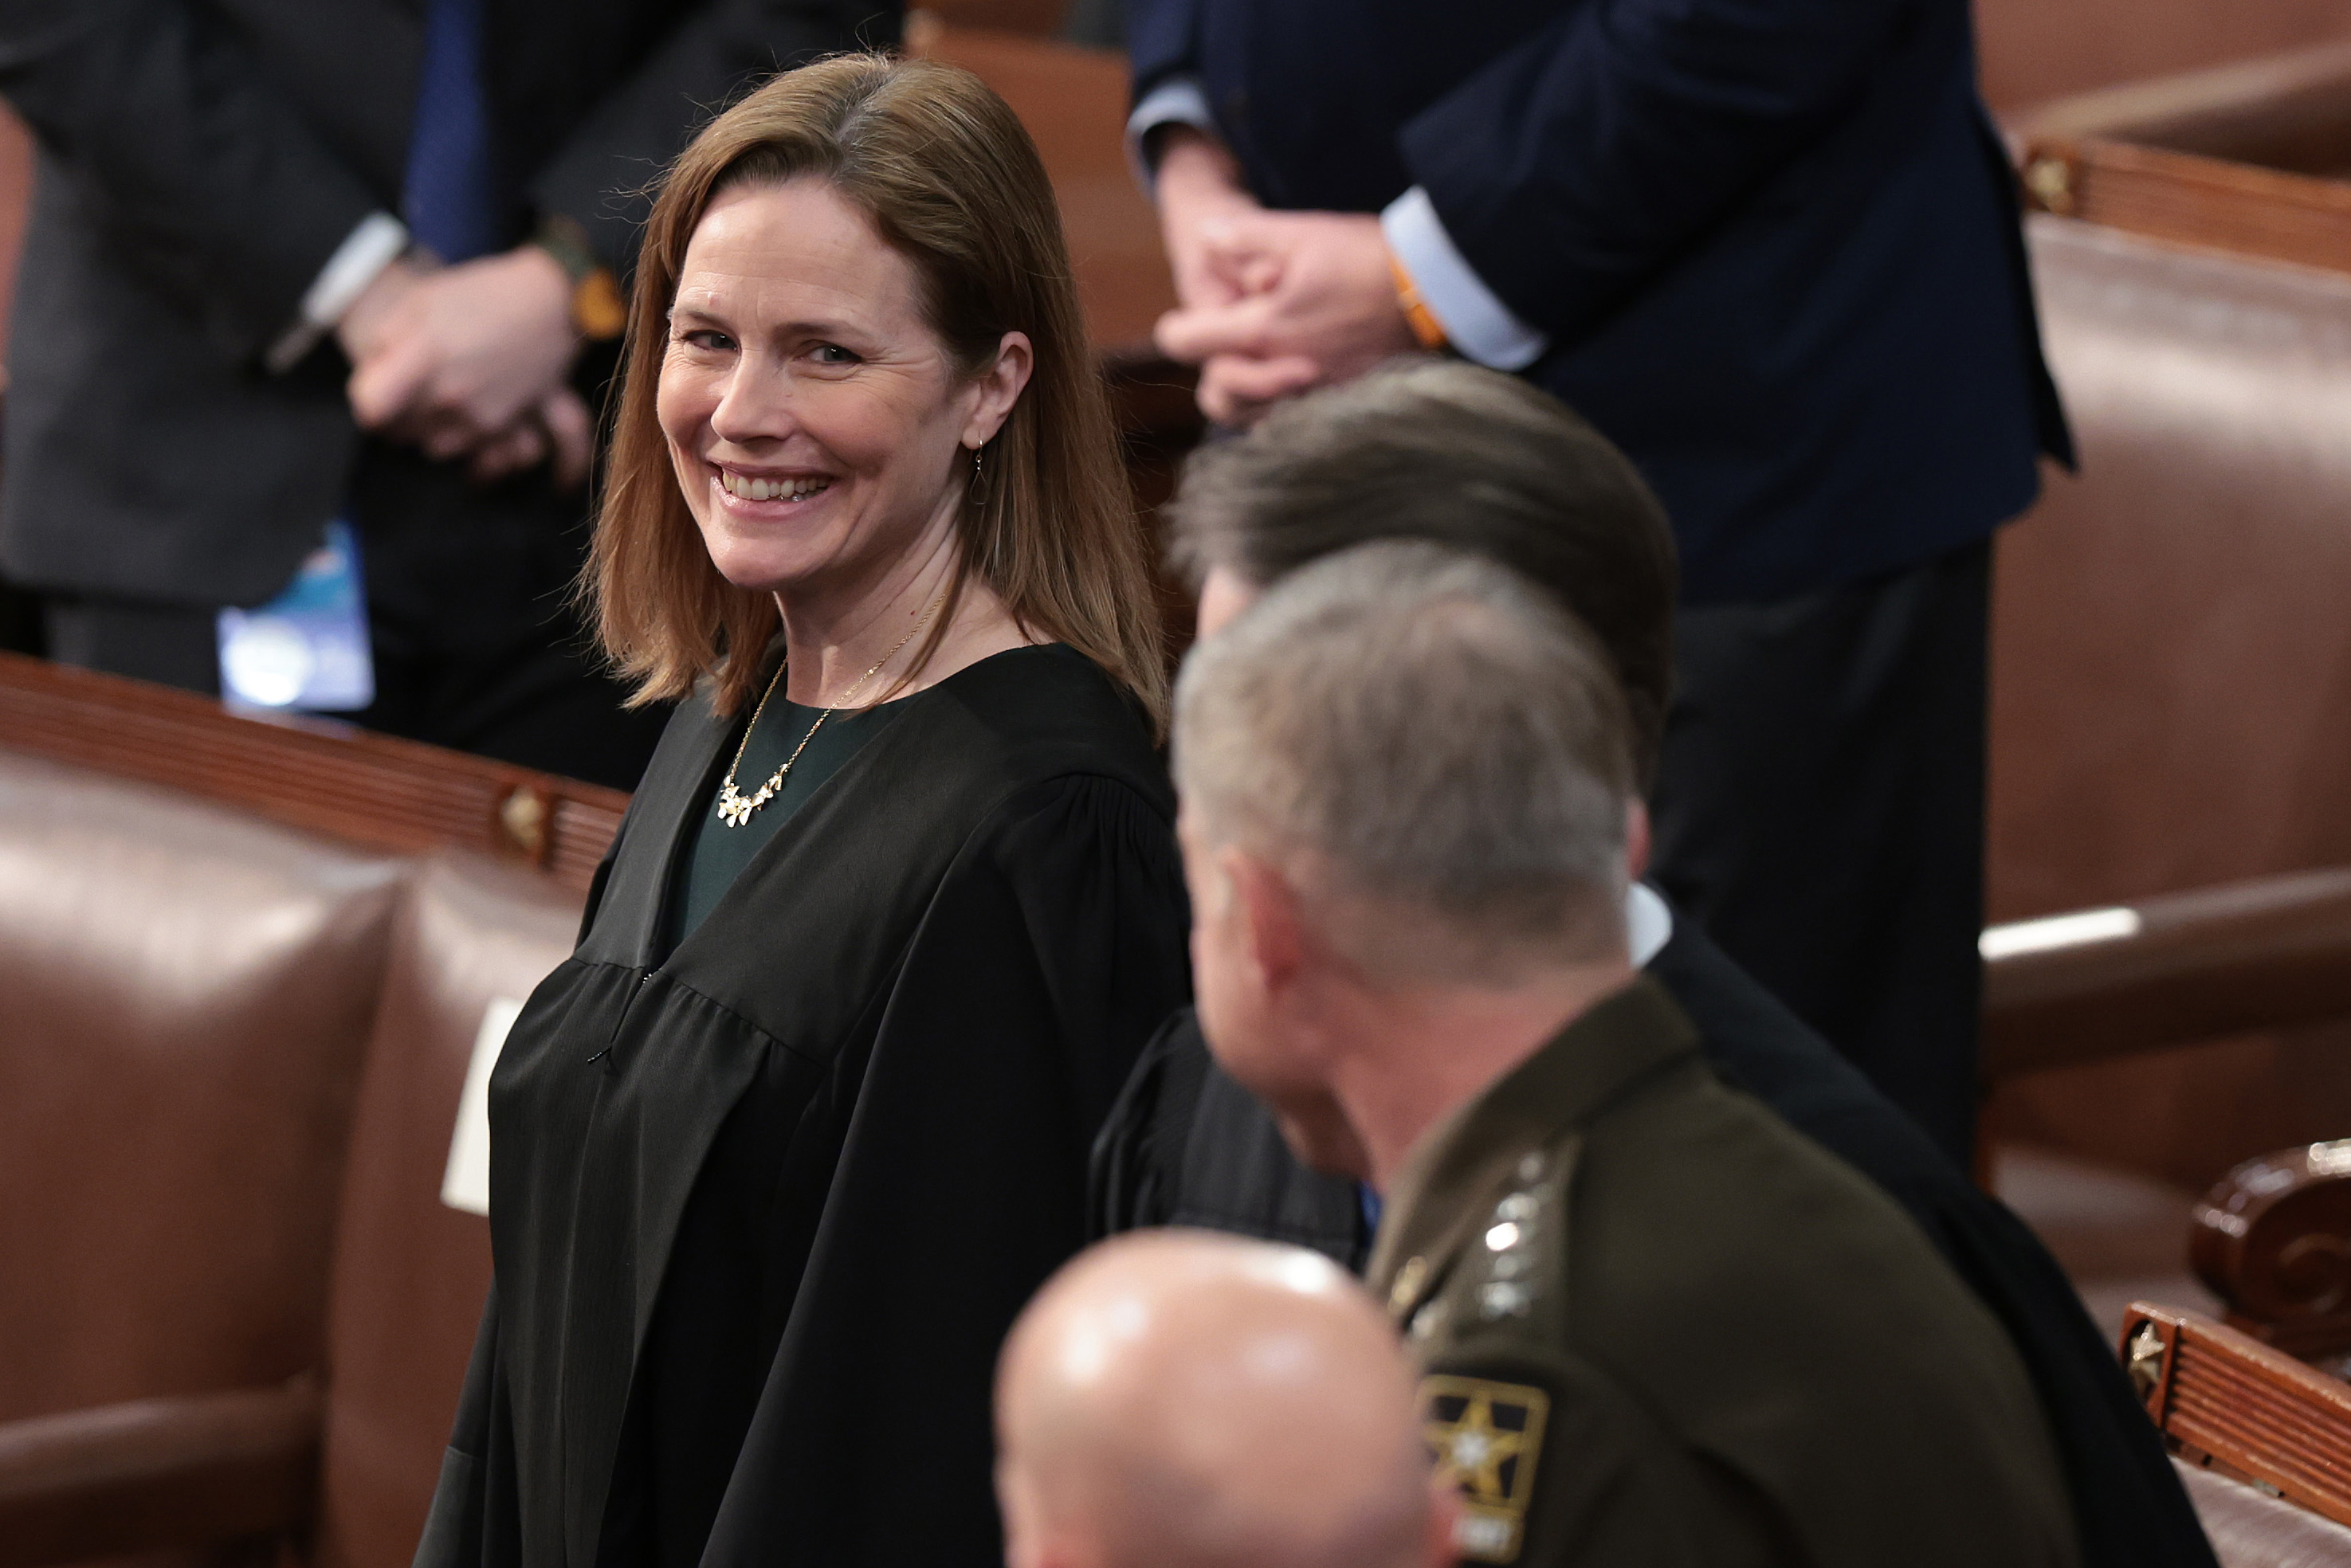 Justice Amy Coney Barrett is seen speaking to other justices before the State of the Union address.